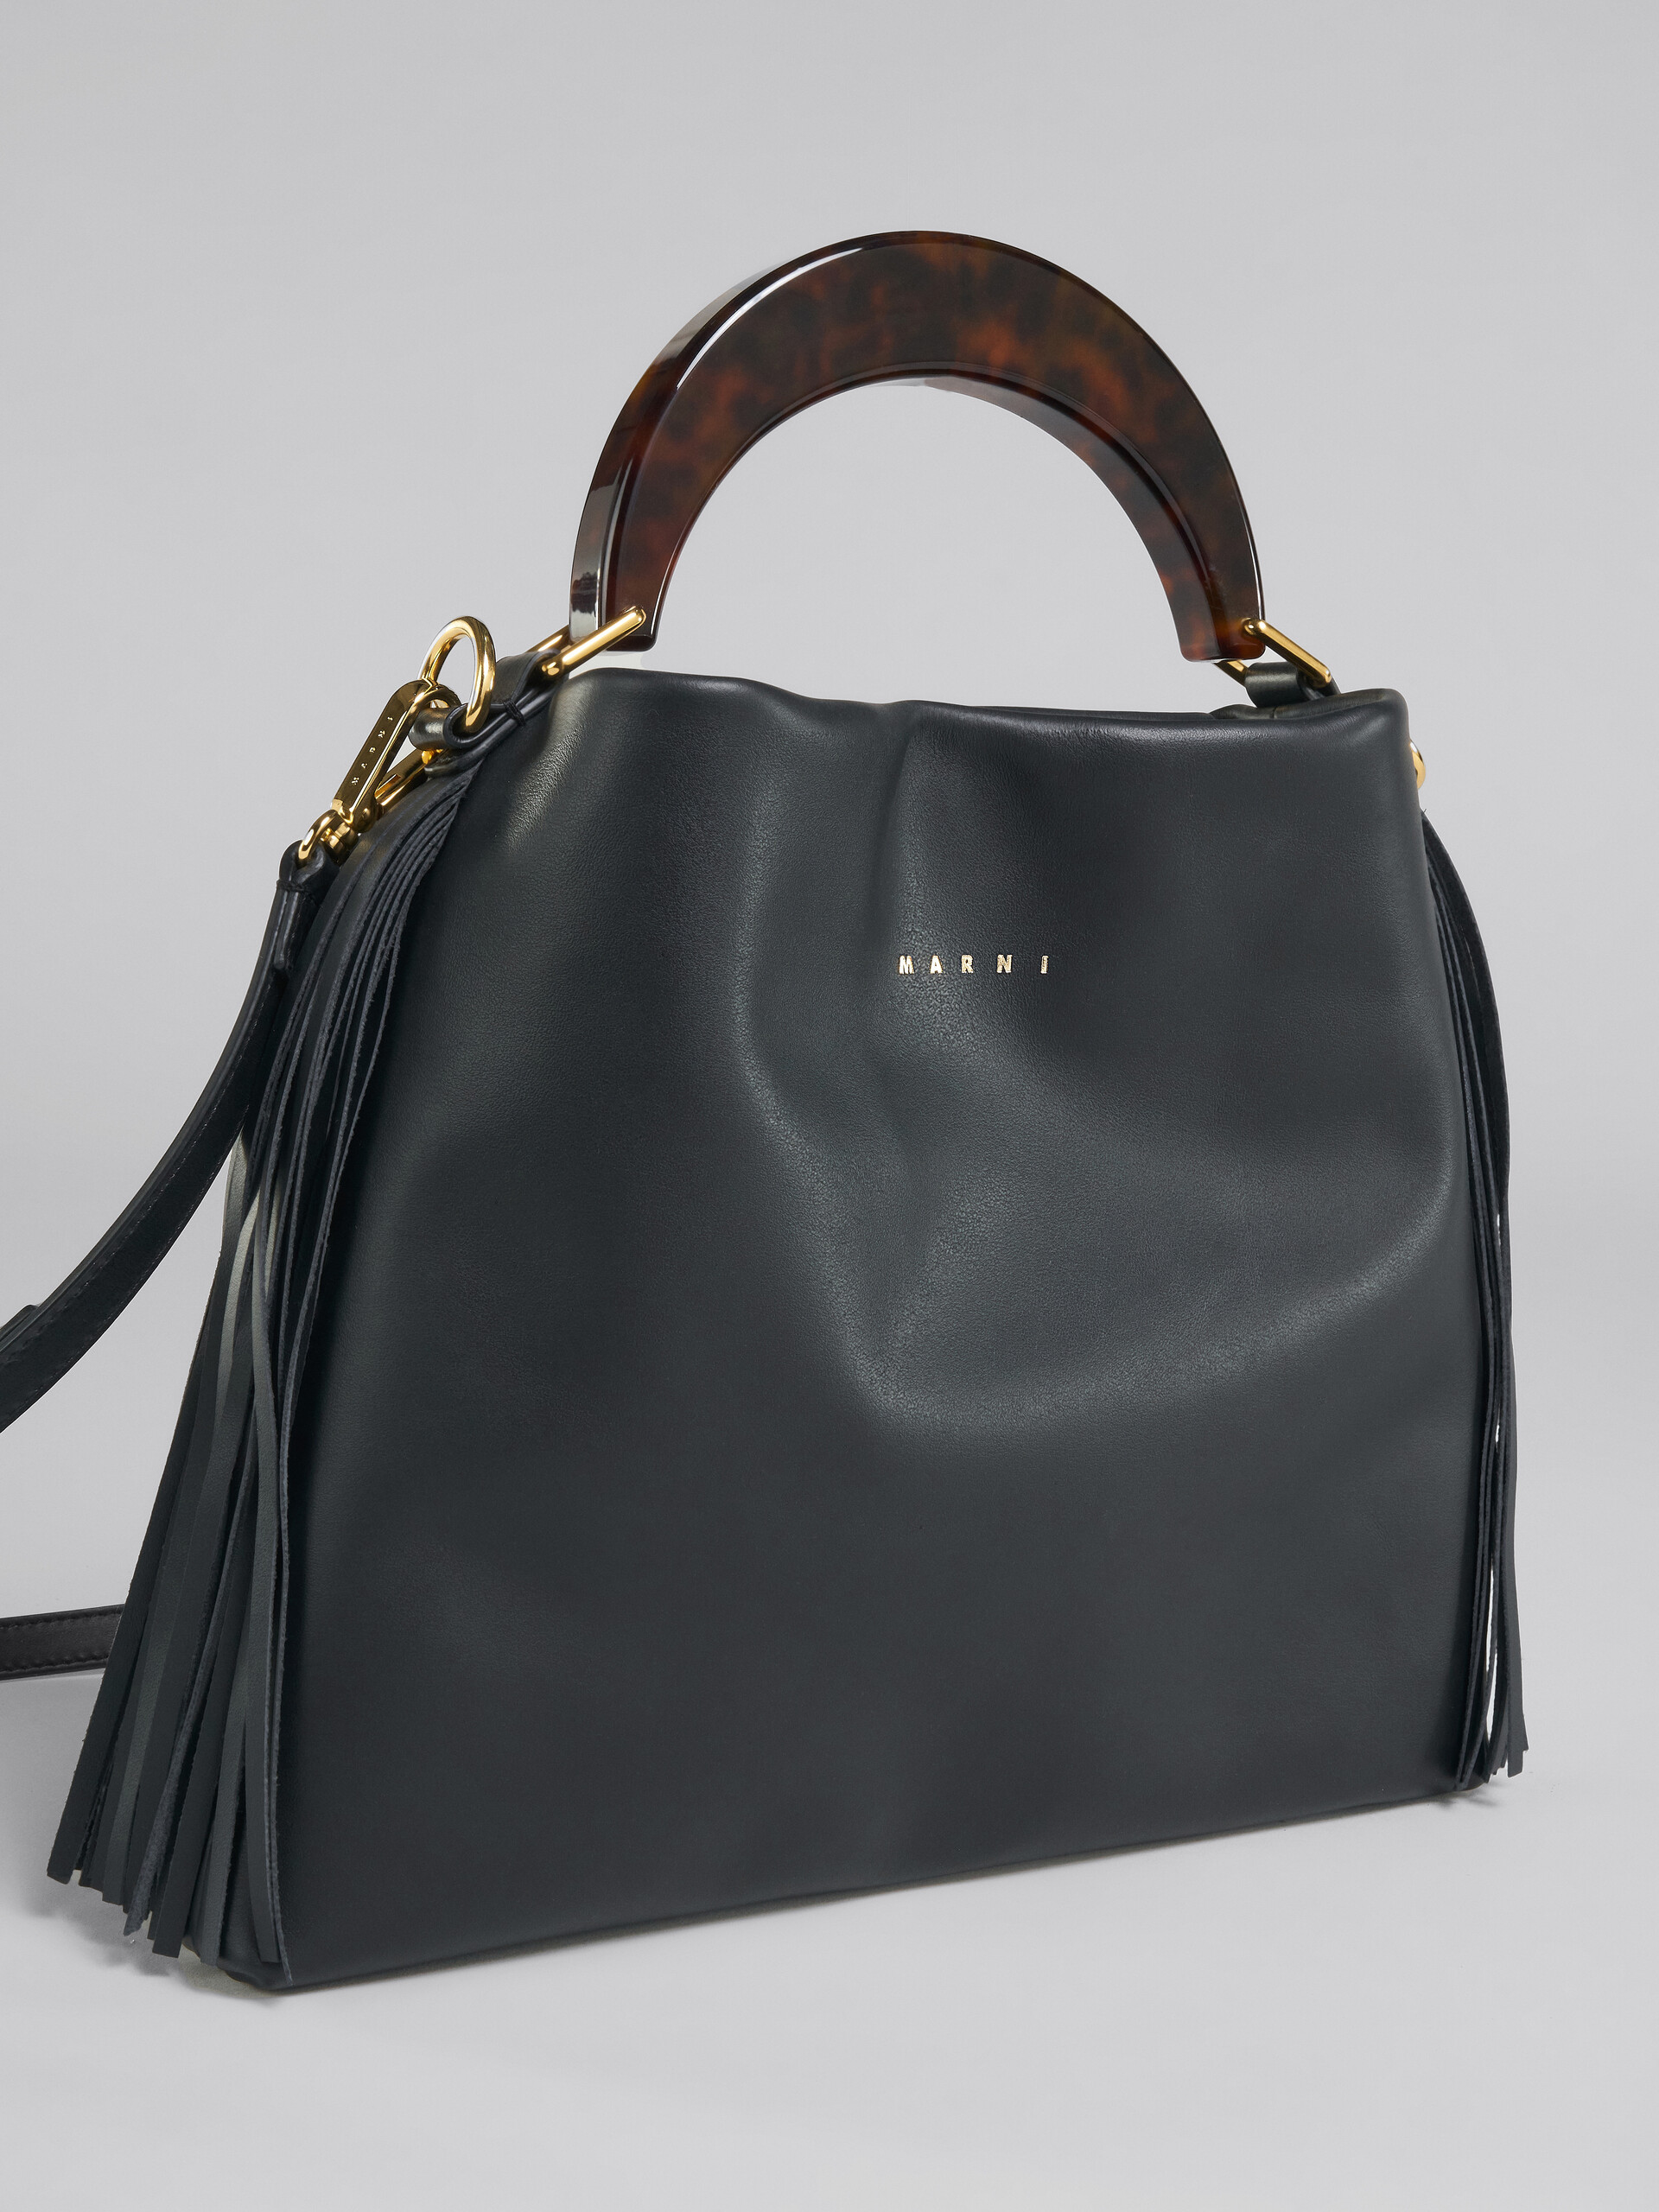 Venice Small Bag in black leather with fringes - Shoulder Bags - Image 5